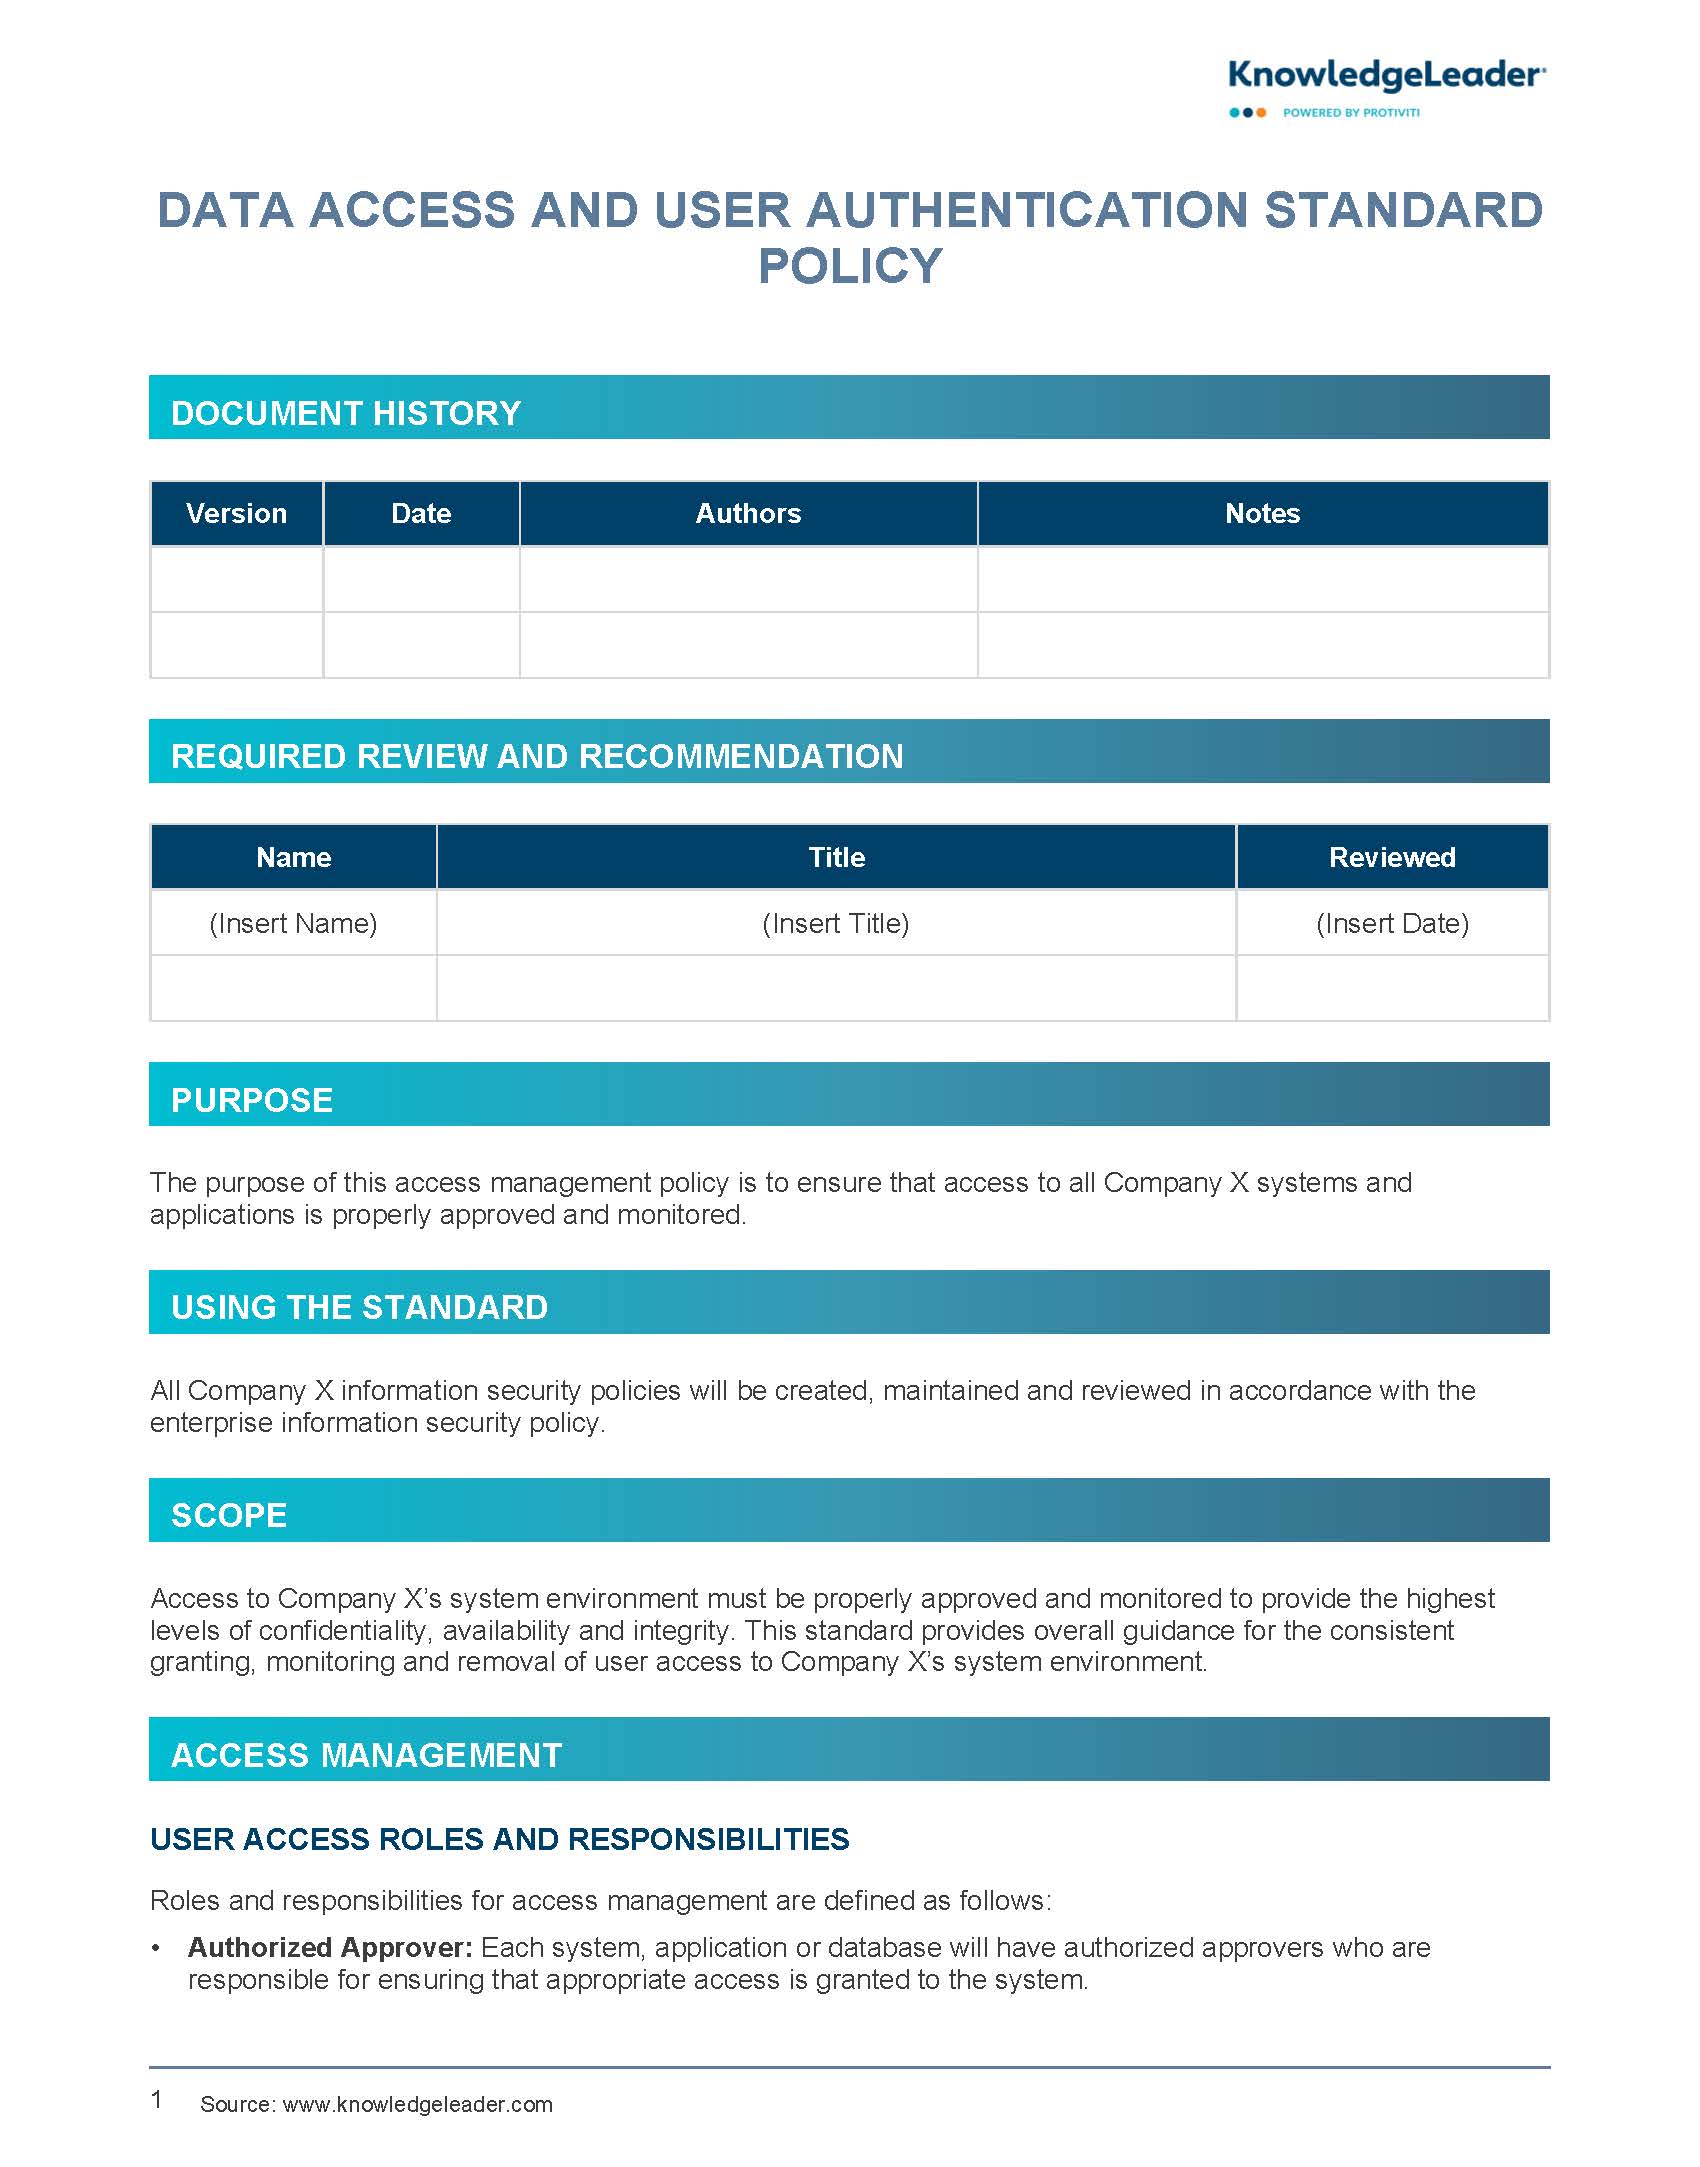 Screenshot of the first page of Data Access and User Authentication Policy